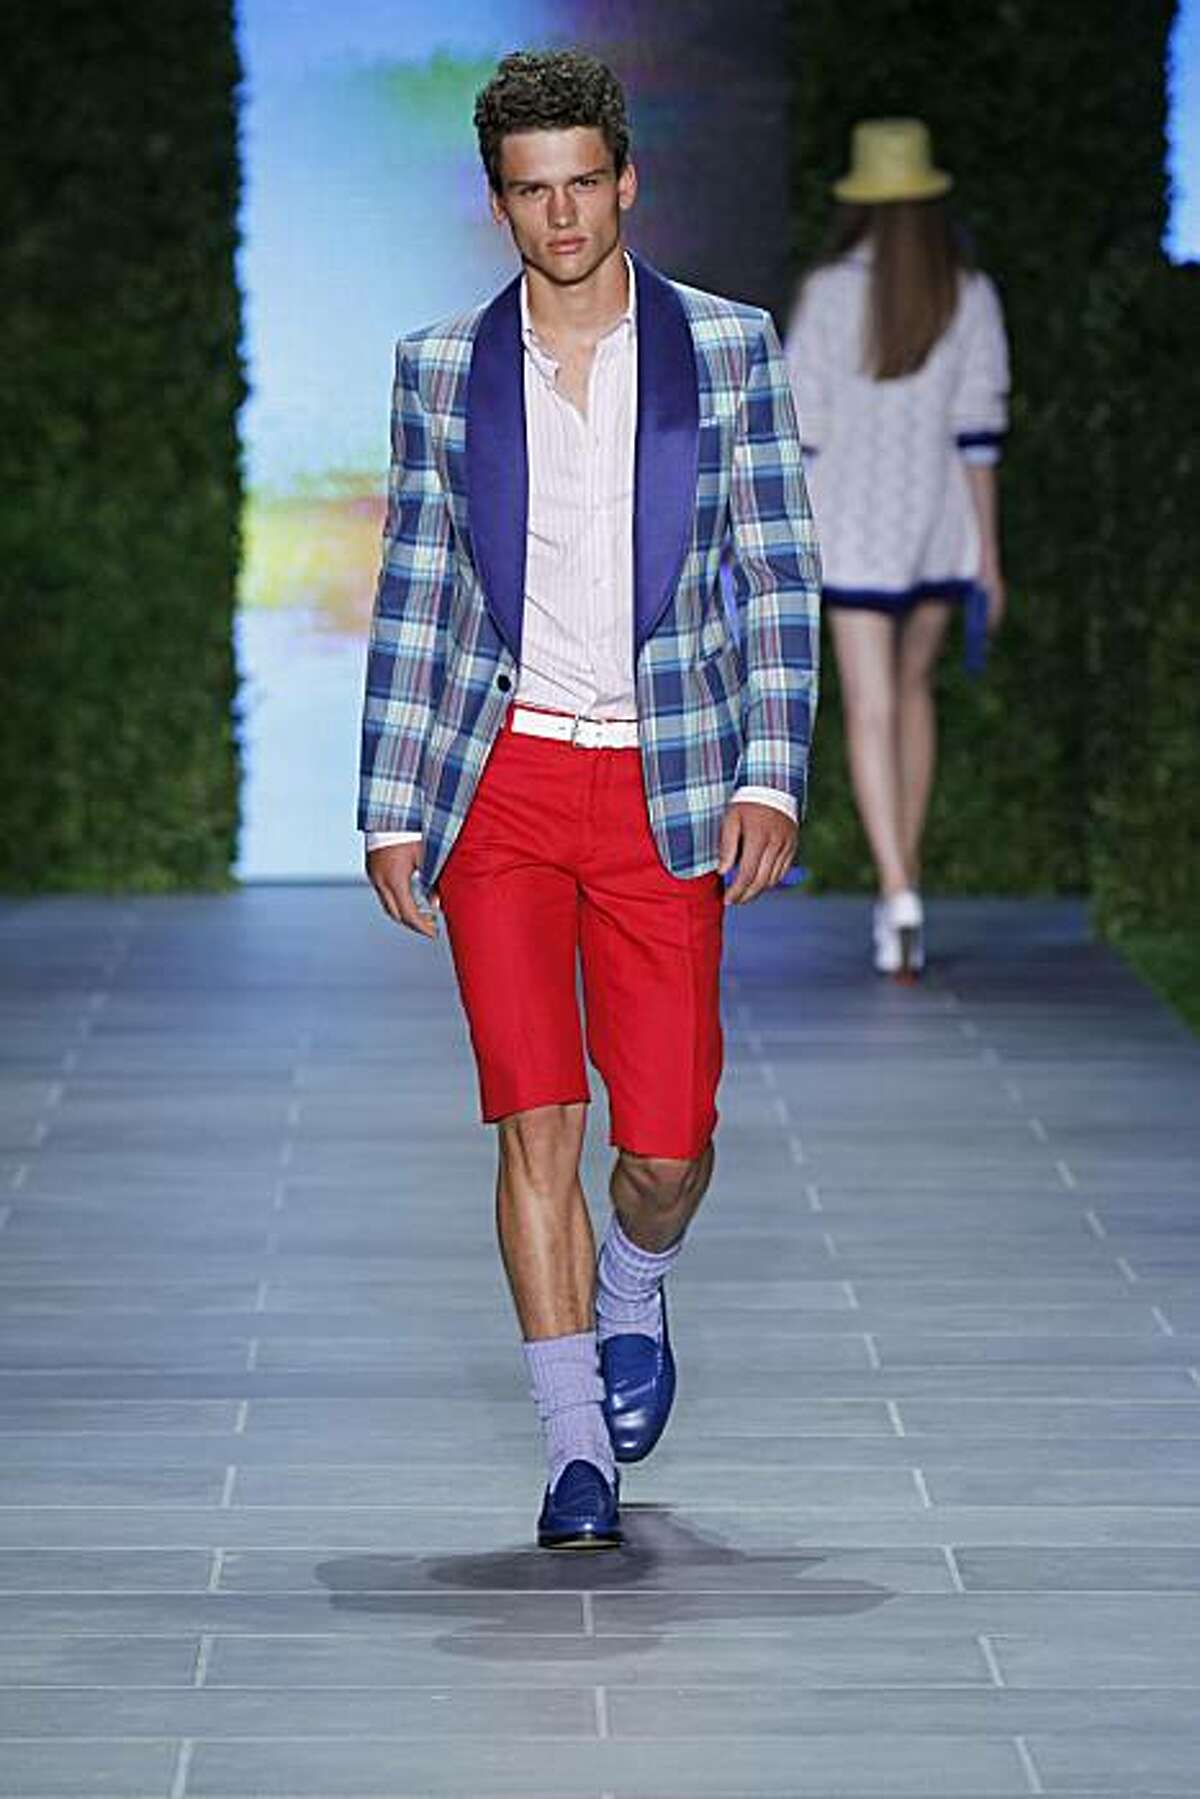 Preppy is back in fashion. (Shh, it never left.)